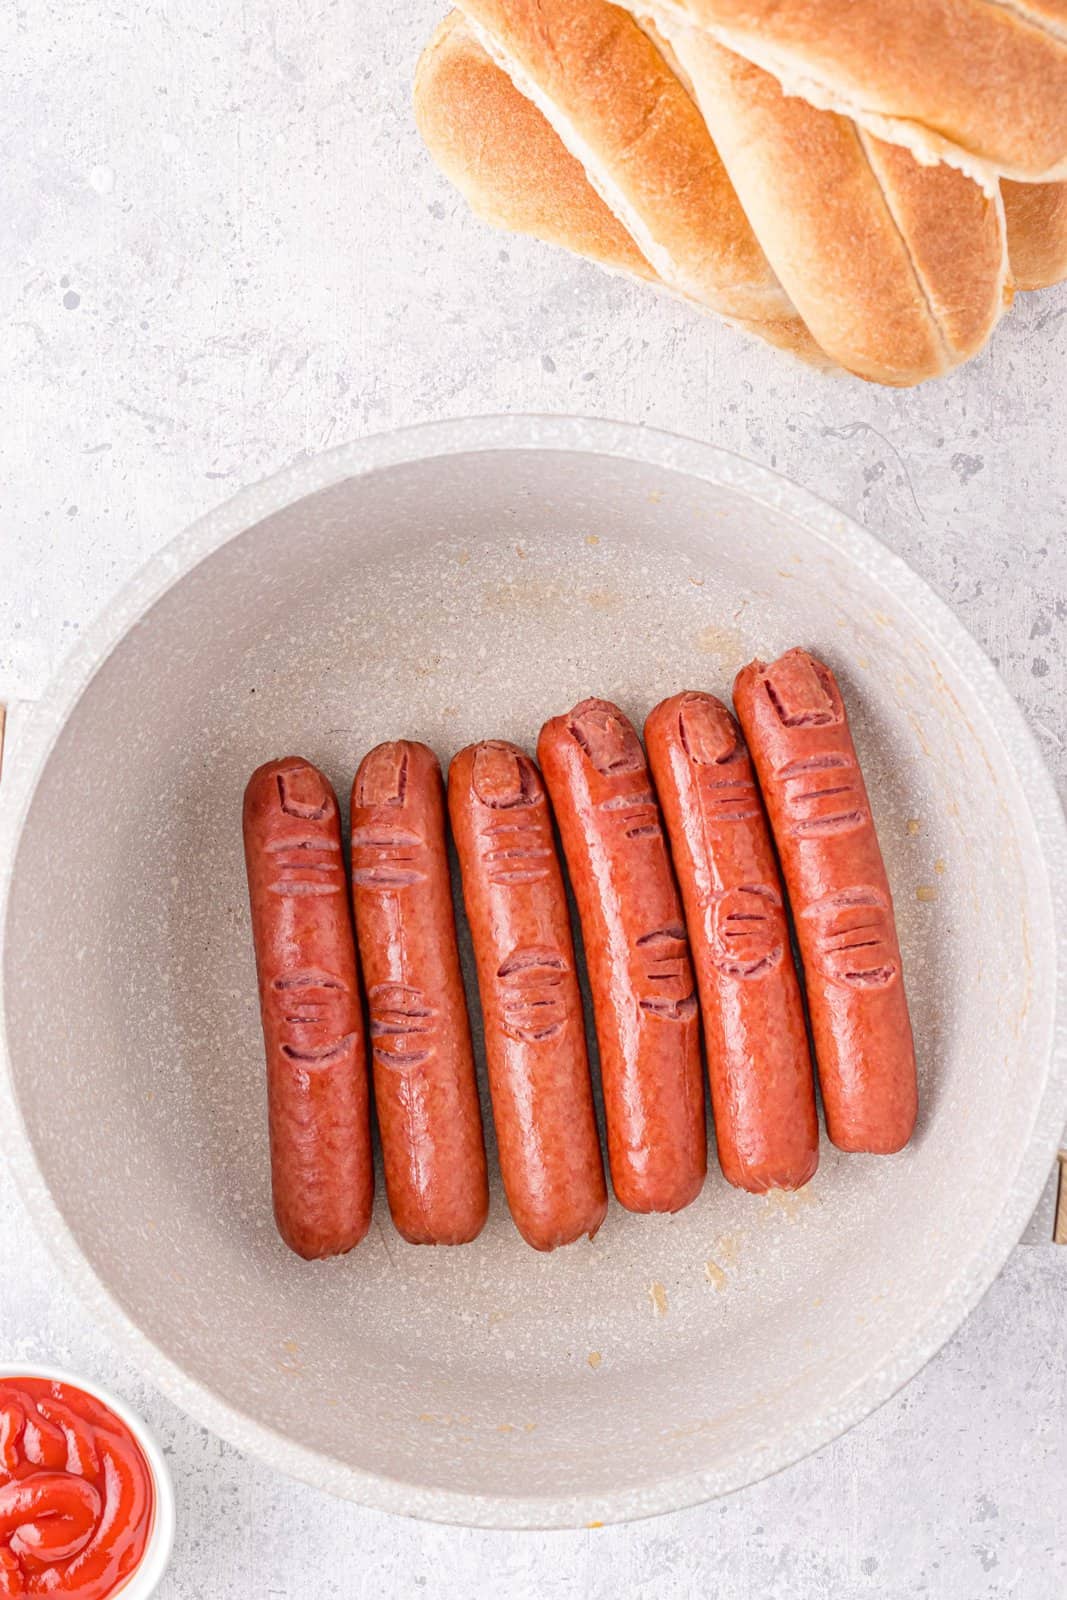 Hot dogs being fried in pan.